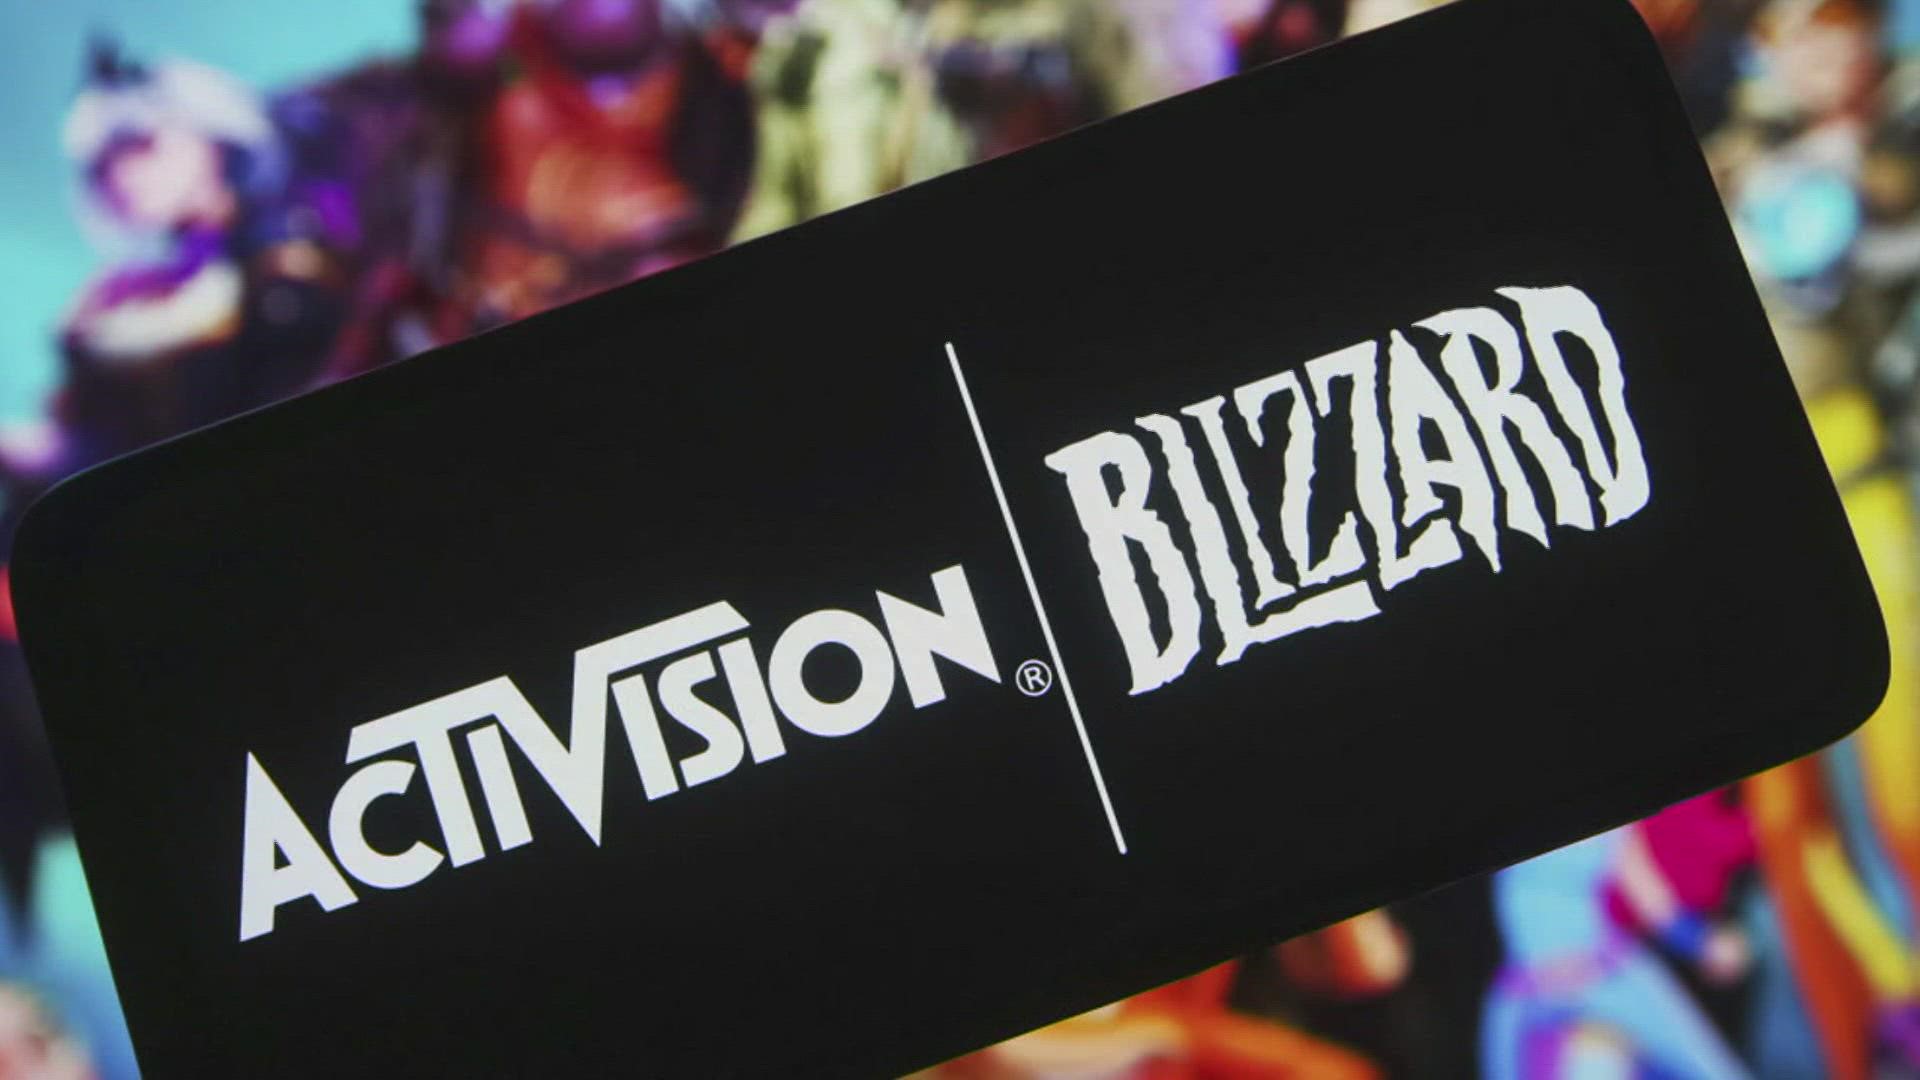 FTC says it will appeal Microsoft's big win in Activision Blizzard battle